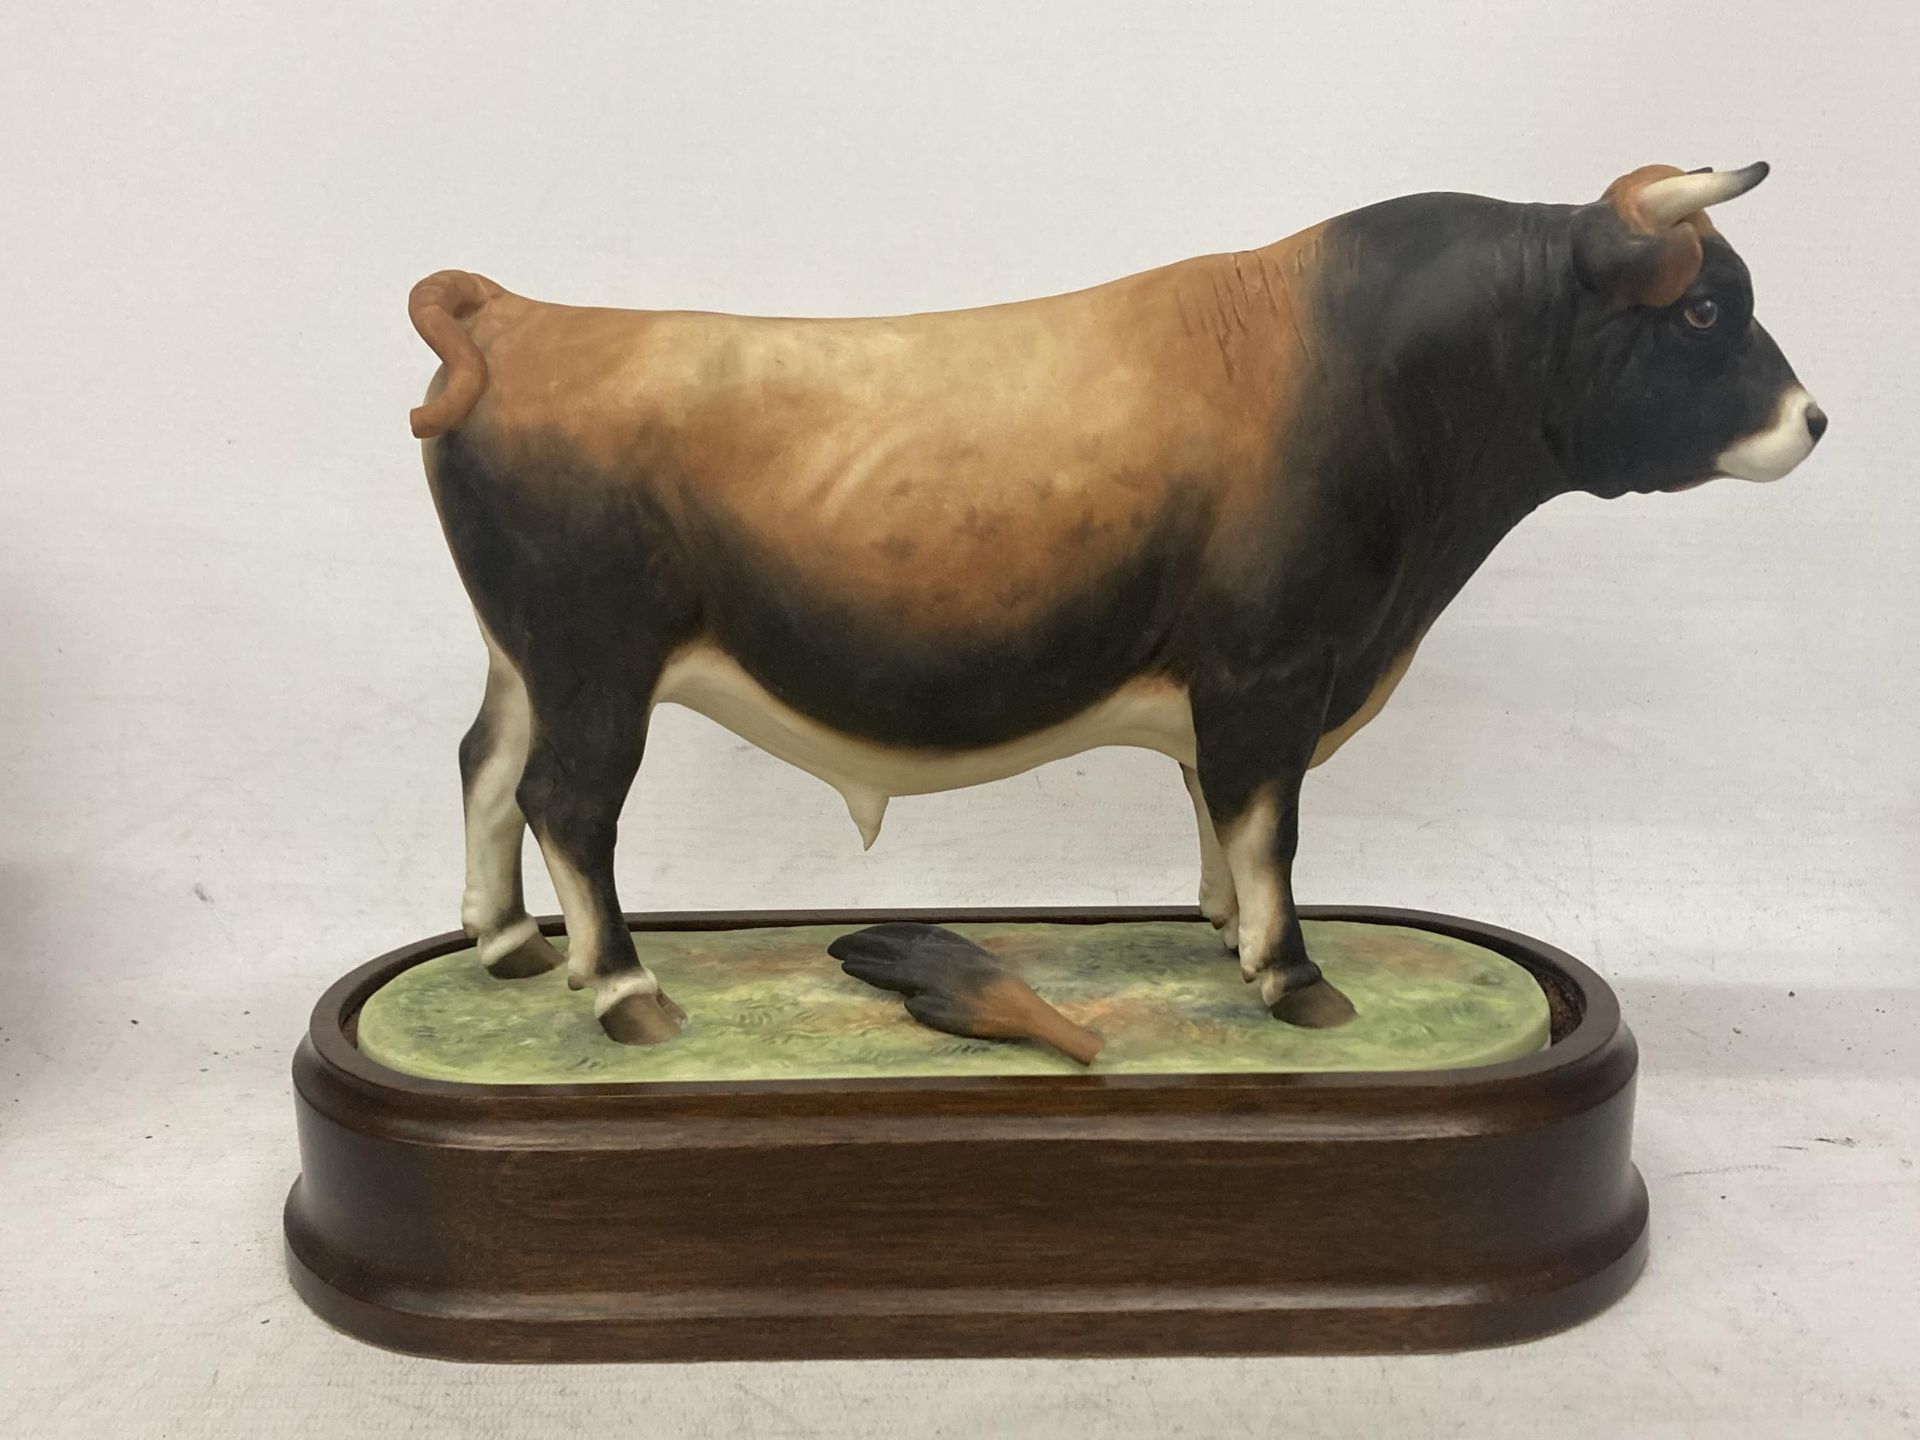 A ROYAL WORCESTER MODEL OF A JERSEY BULL MODELLED BY DORIS LINDNER PRODUCED IN A LIMITED EDITION - Image 3 of 5